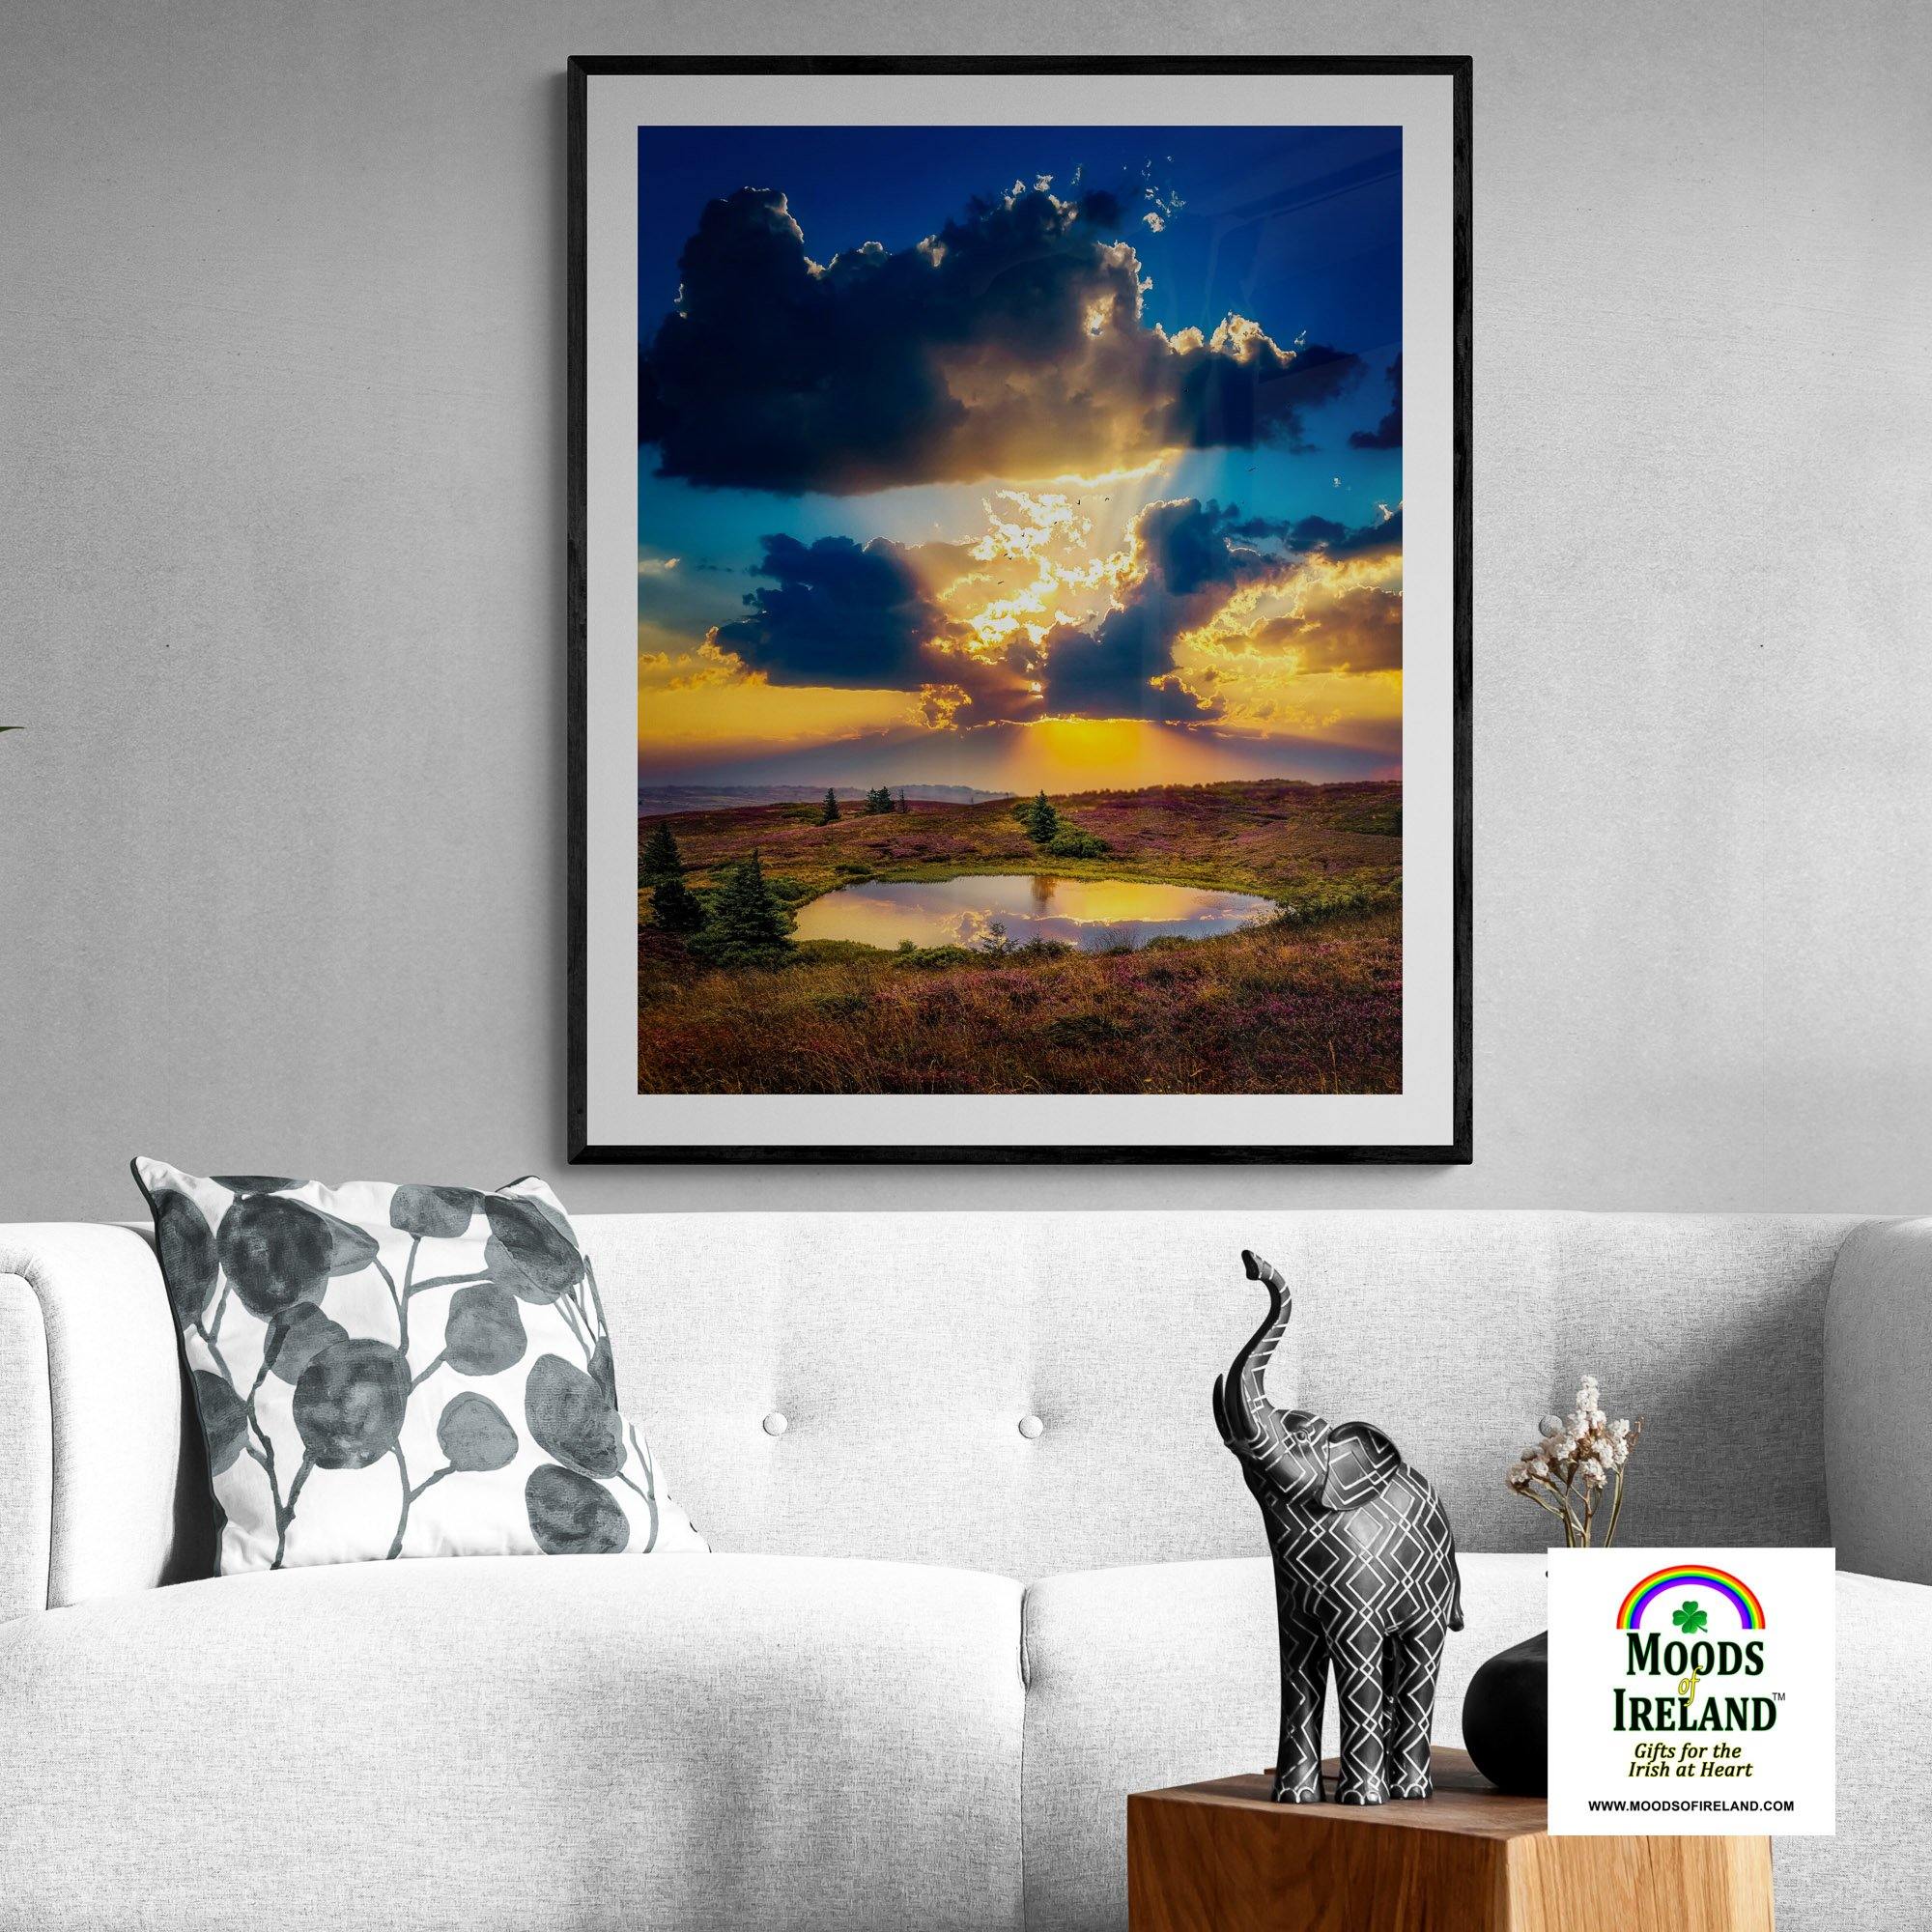 Print - Sunset over Lake at Tountinna, County Tipperary - Moods of Ireland